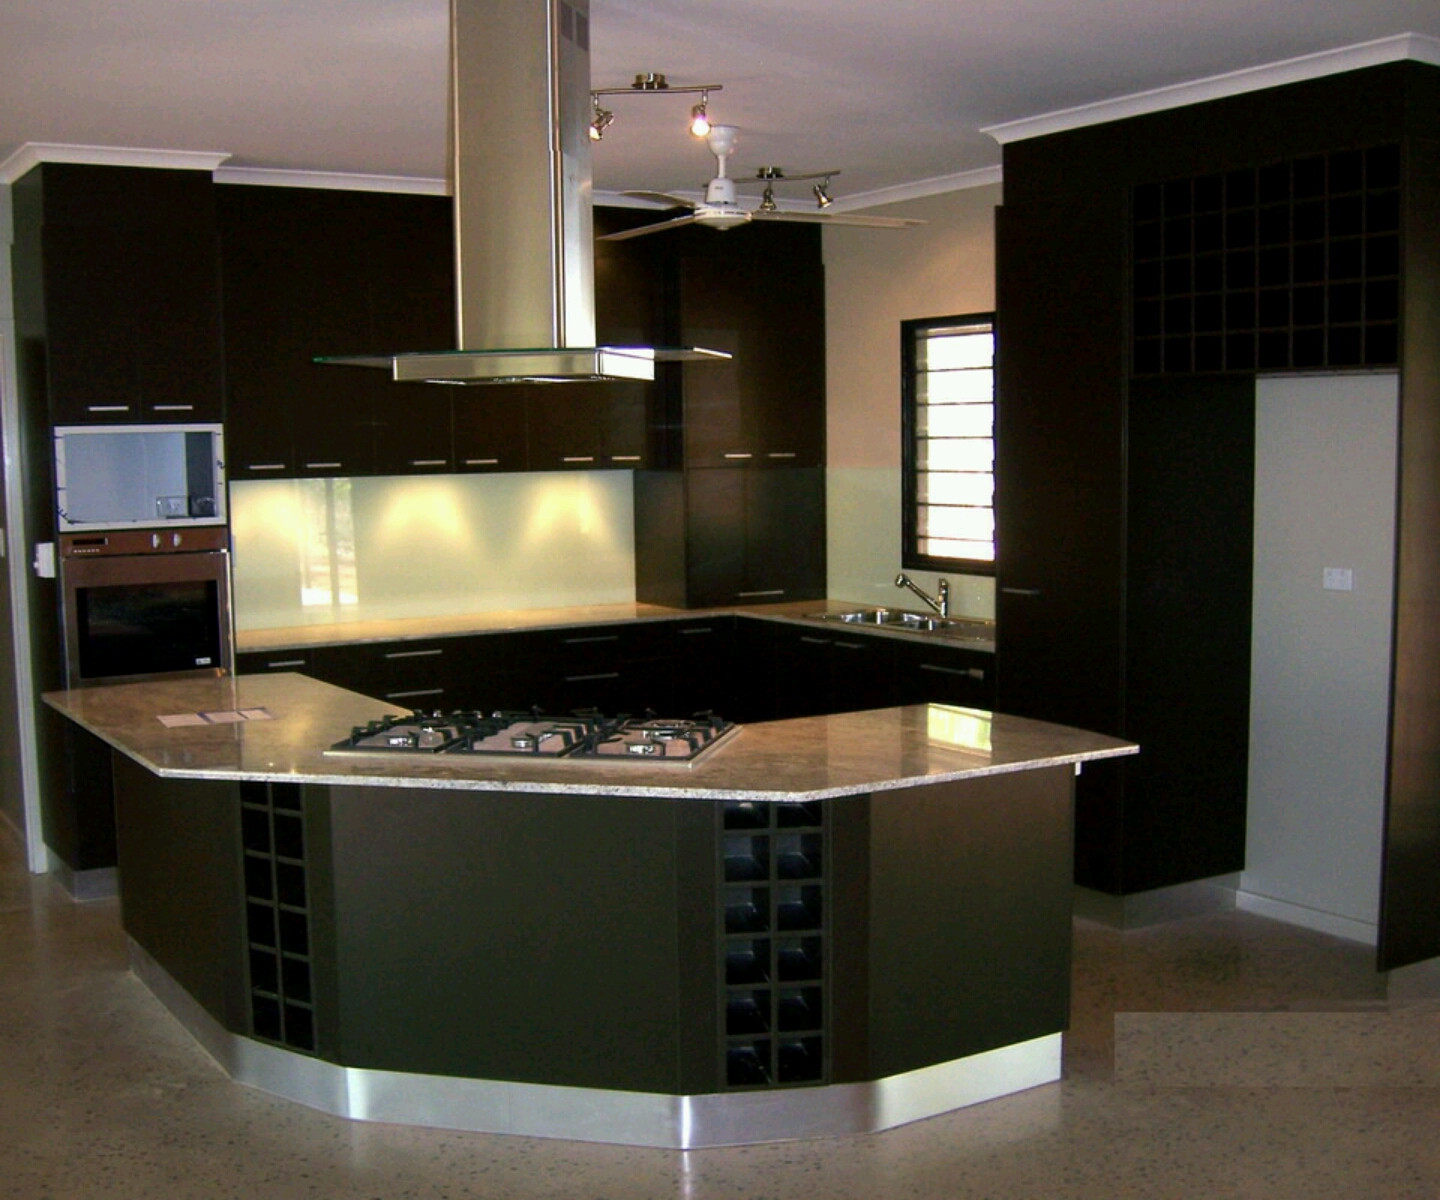 Modern Style Kitchen Cabinets
 New home designs latest Modern kitchen cabinets designs